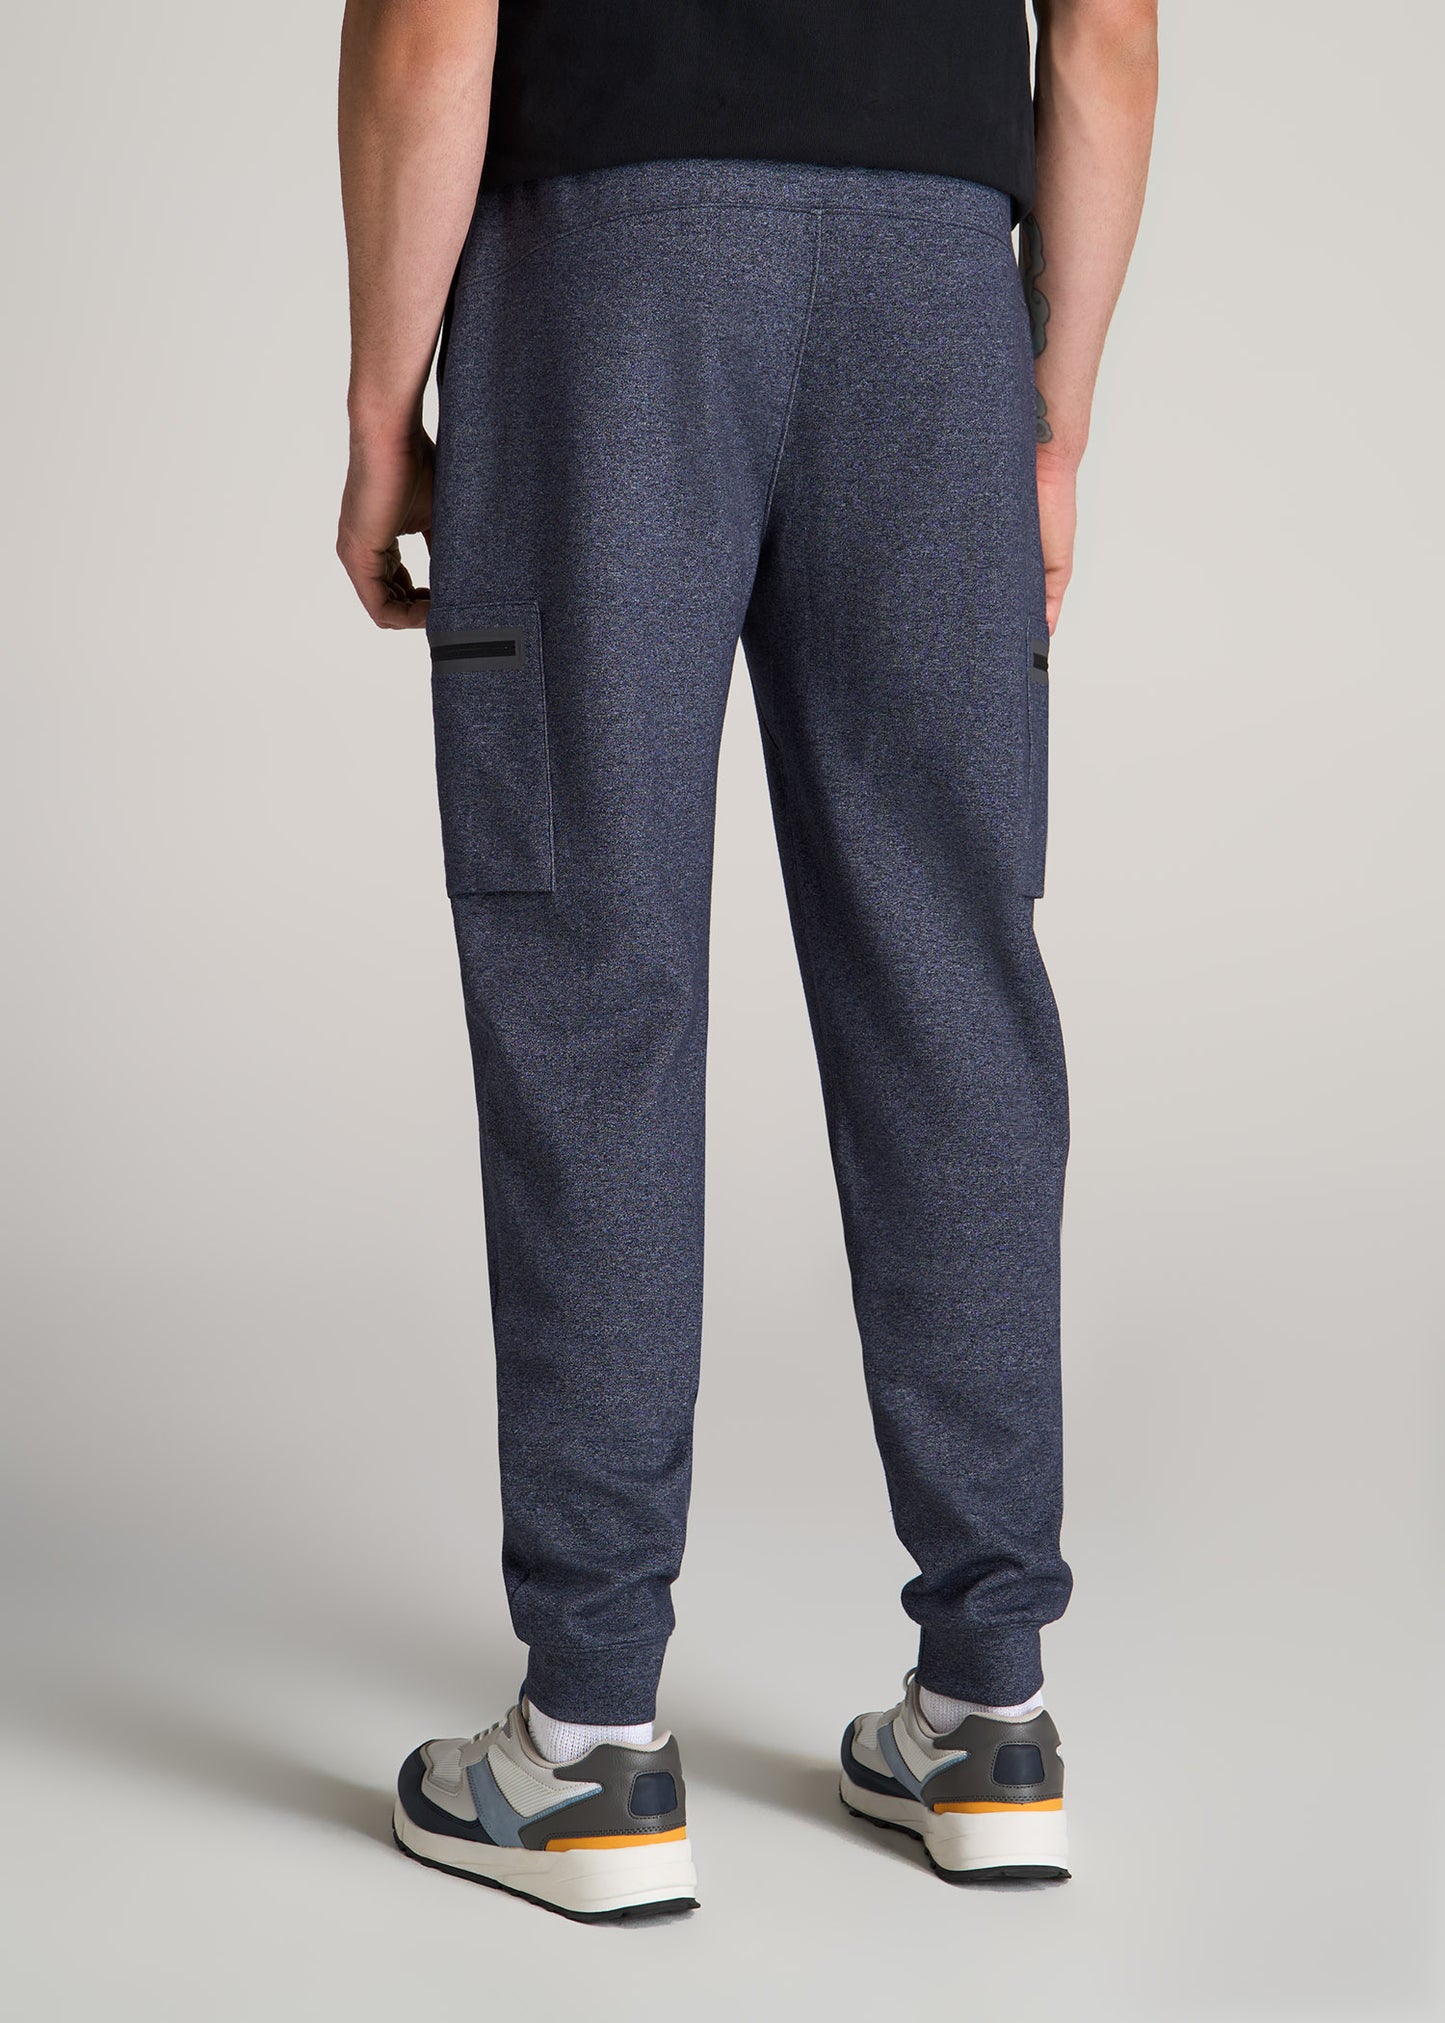 Utility Cargo Joggers for Tall Men in Evening Blue Mix